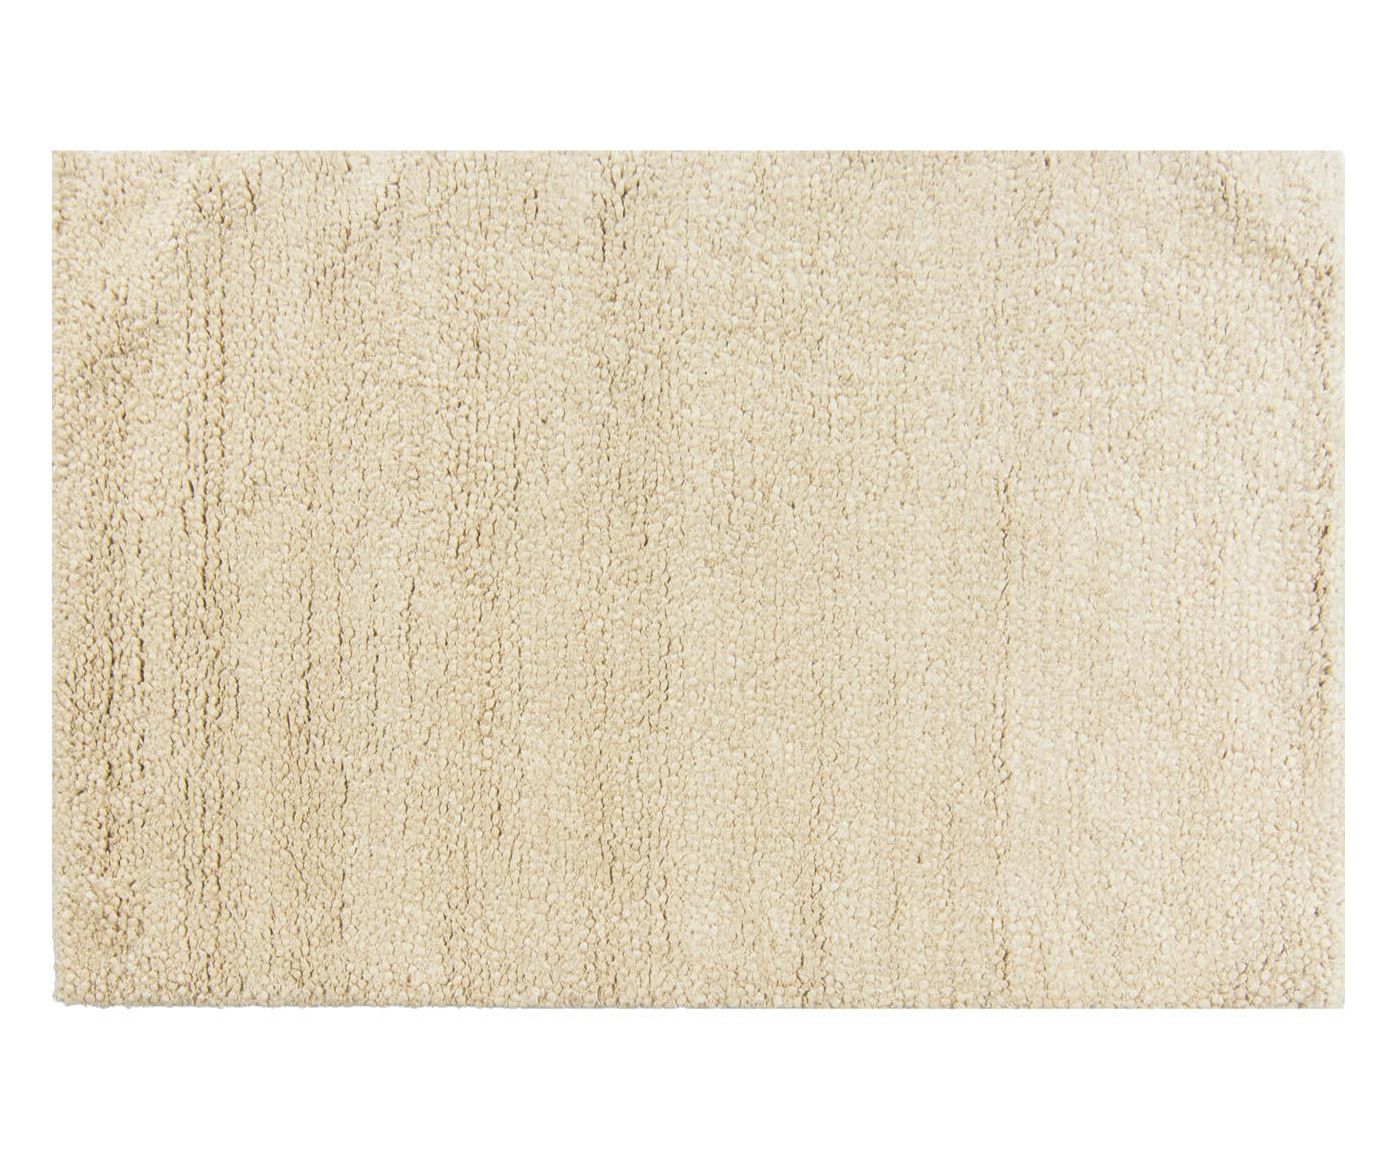 Tapete Indiano Colorado Creme - 140X200cm | Westwing.com.br